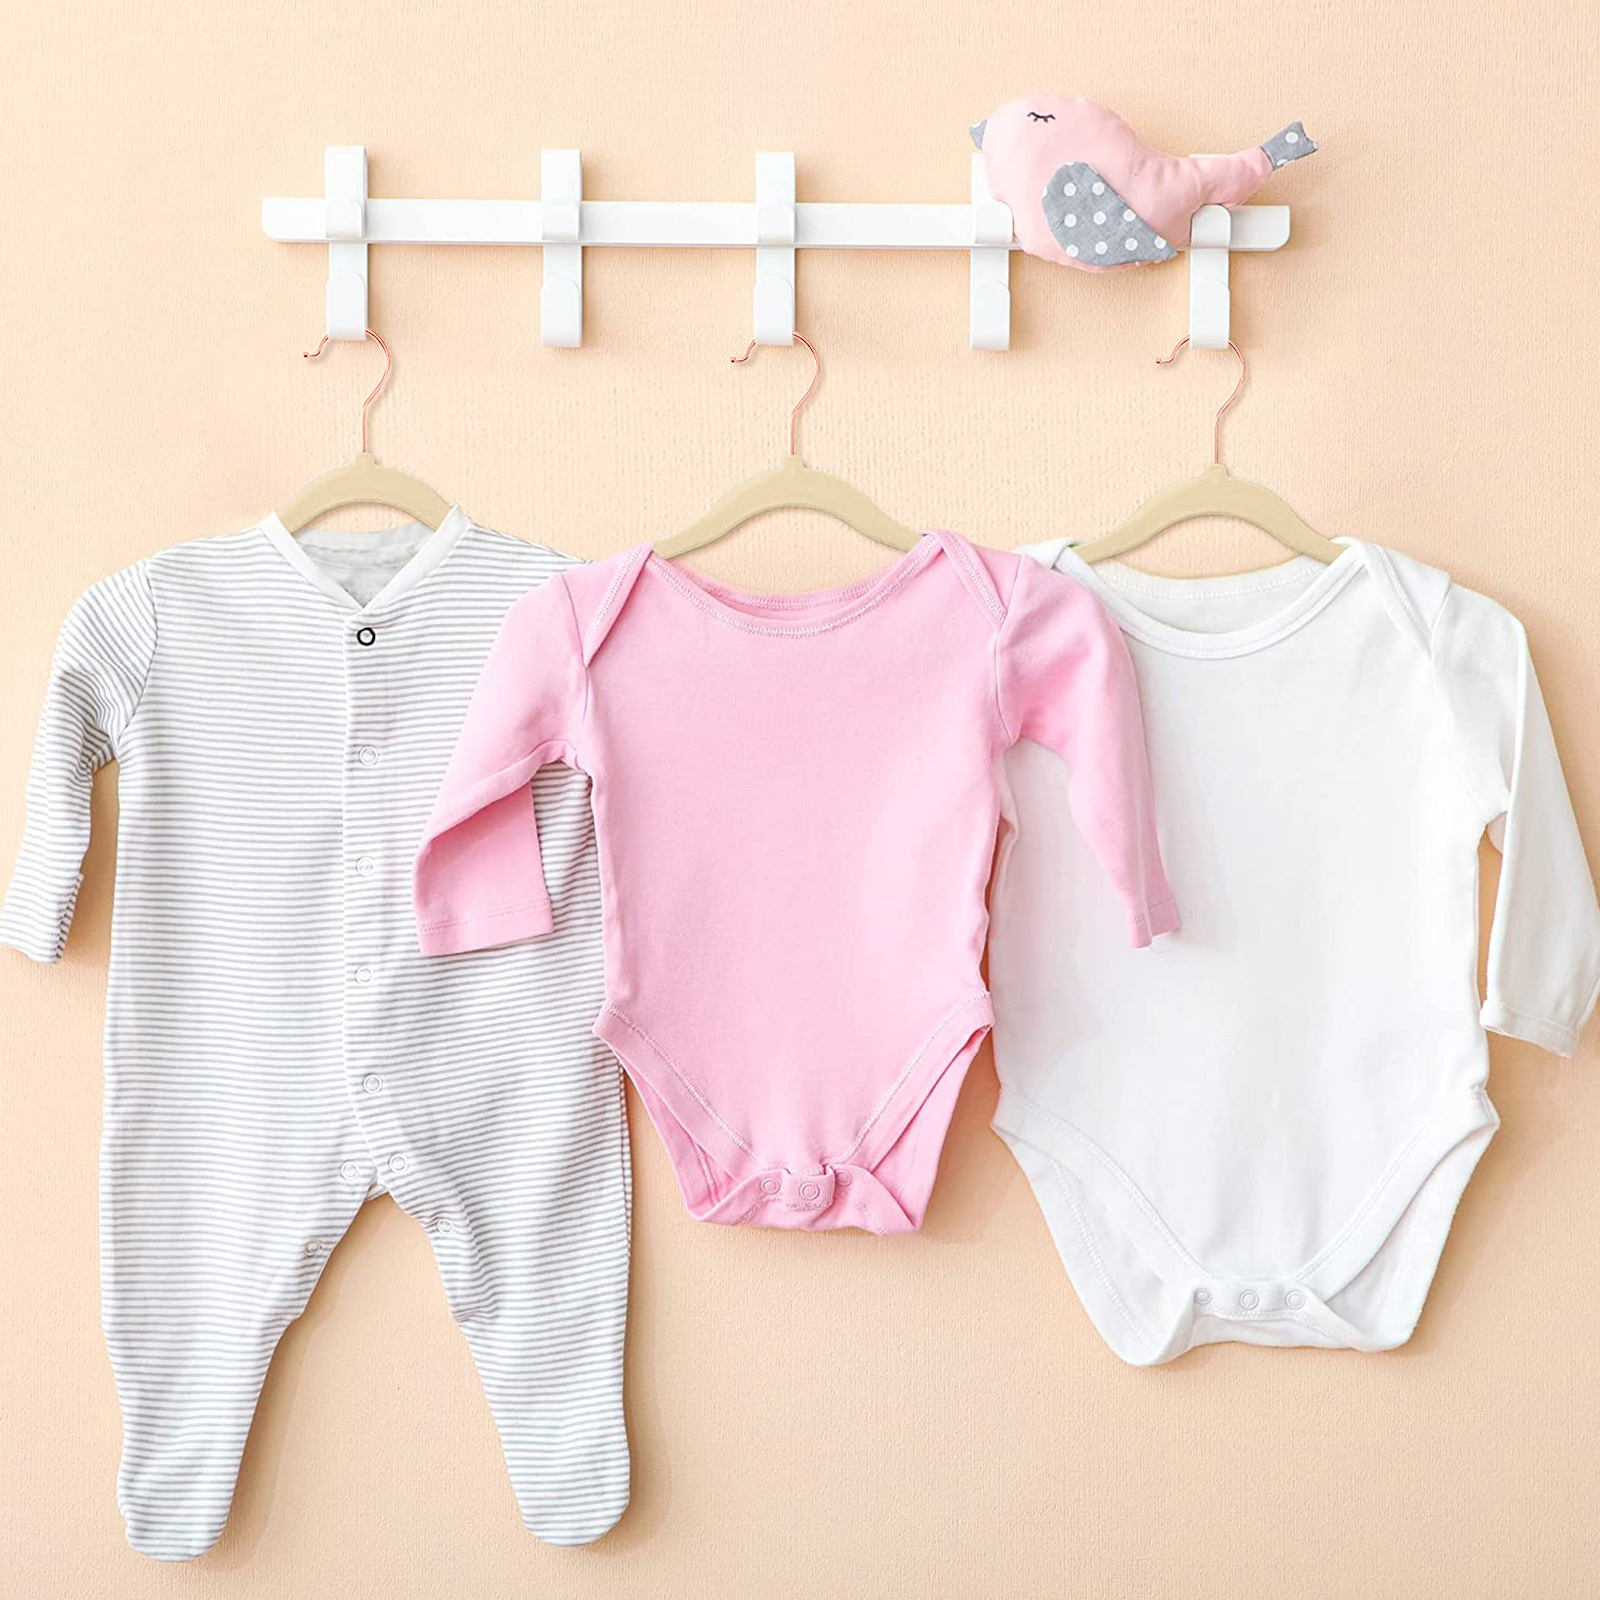 Rose Textiles Baby Hangers 15 Pack - Grey-ROS14508